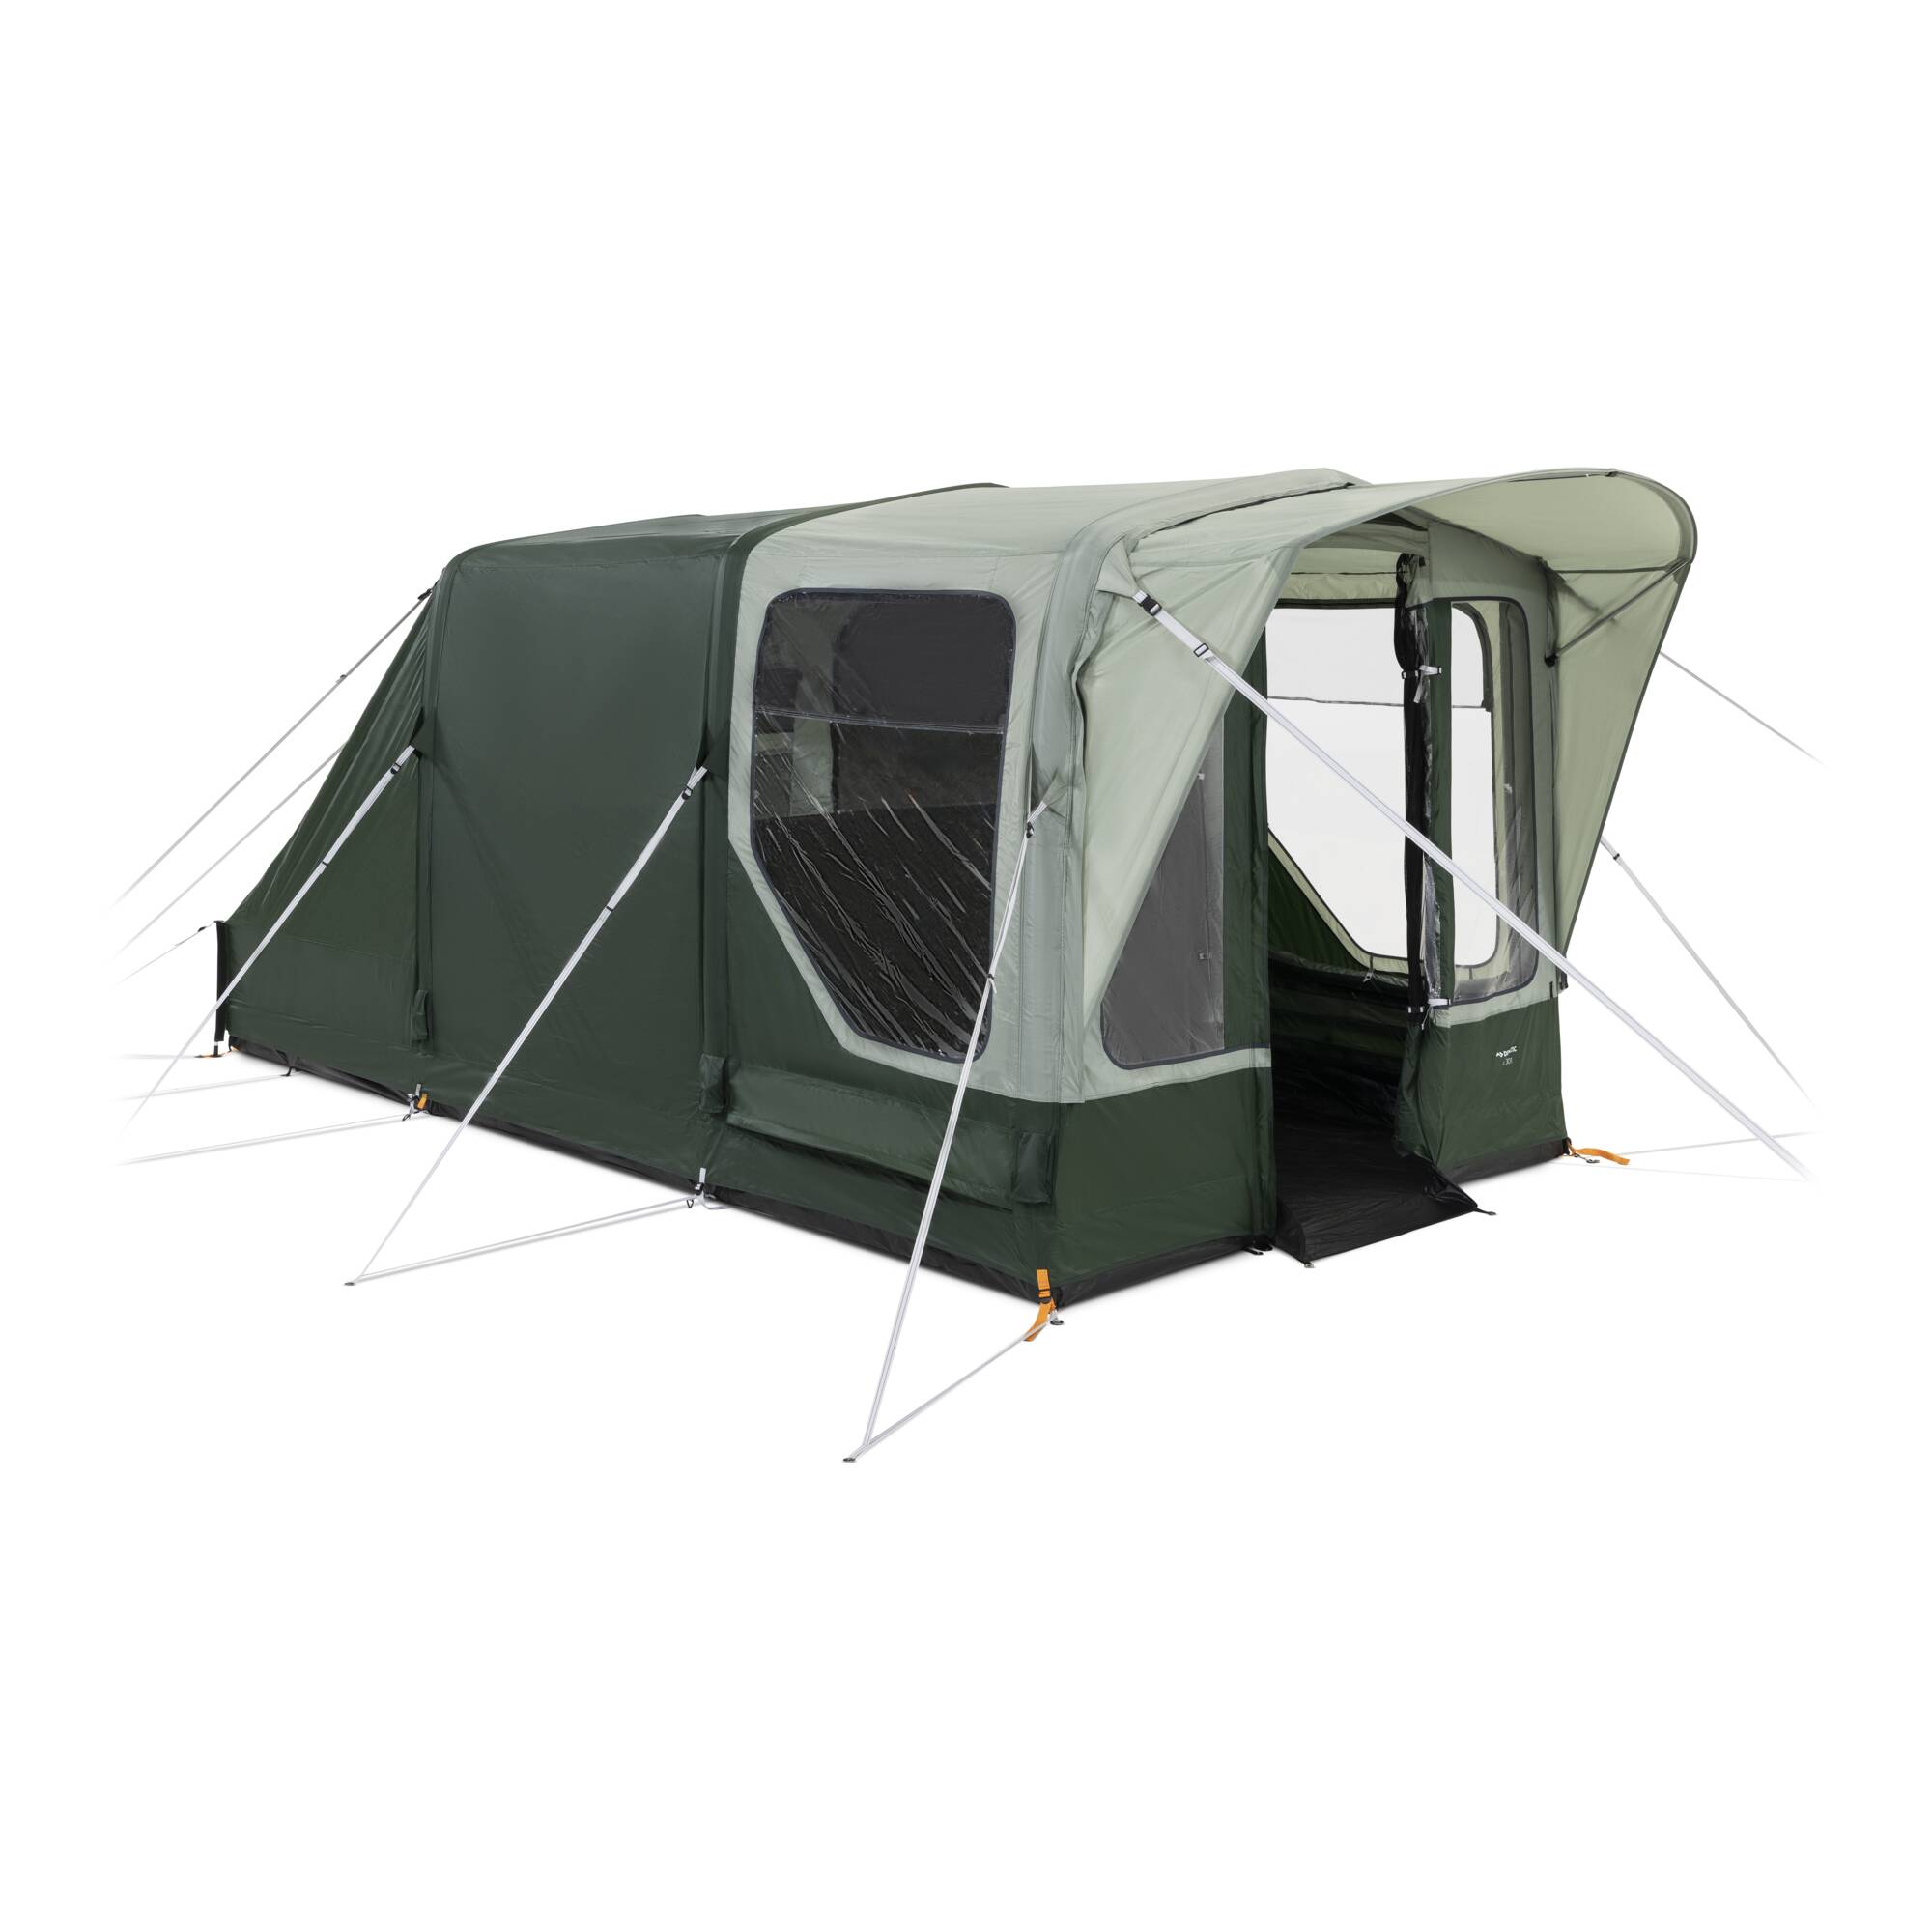 Dometic Boracay Ftc 301 Tent Spare Parts